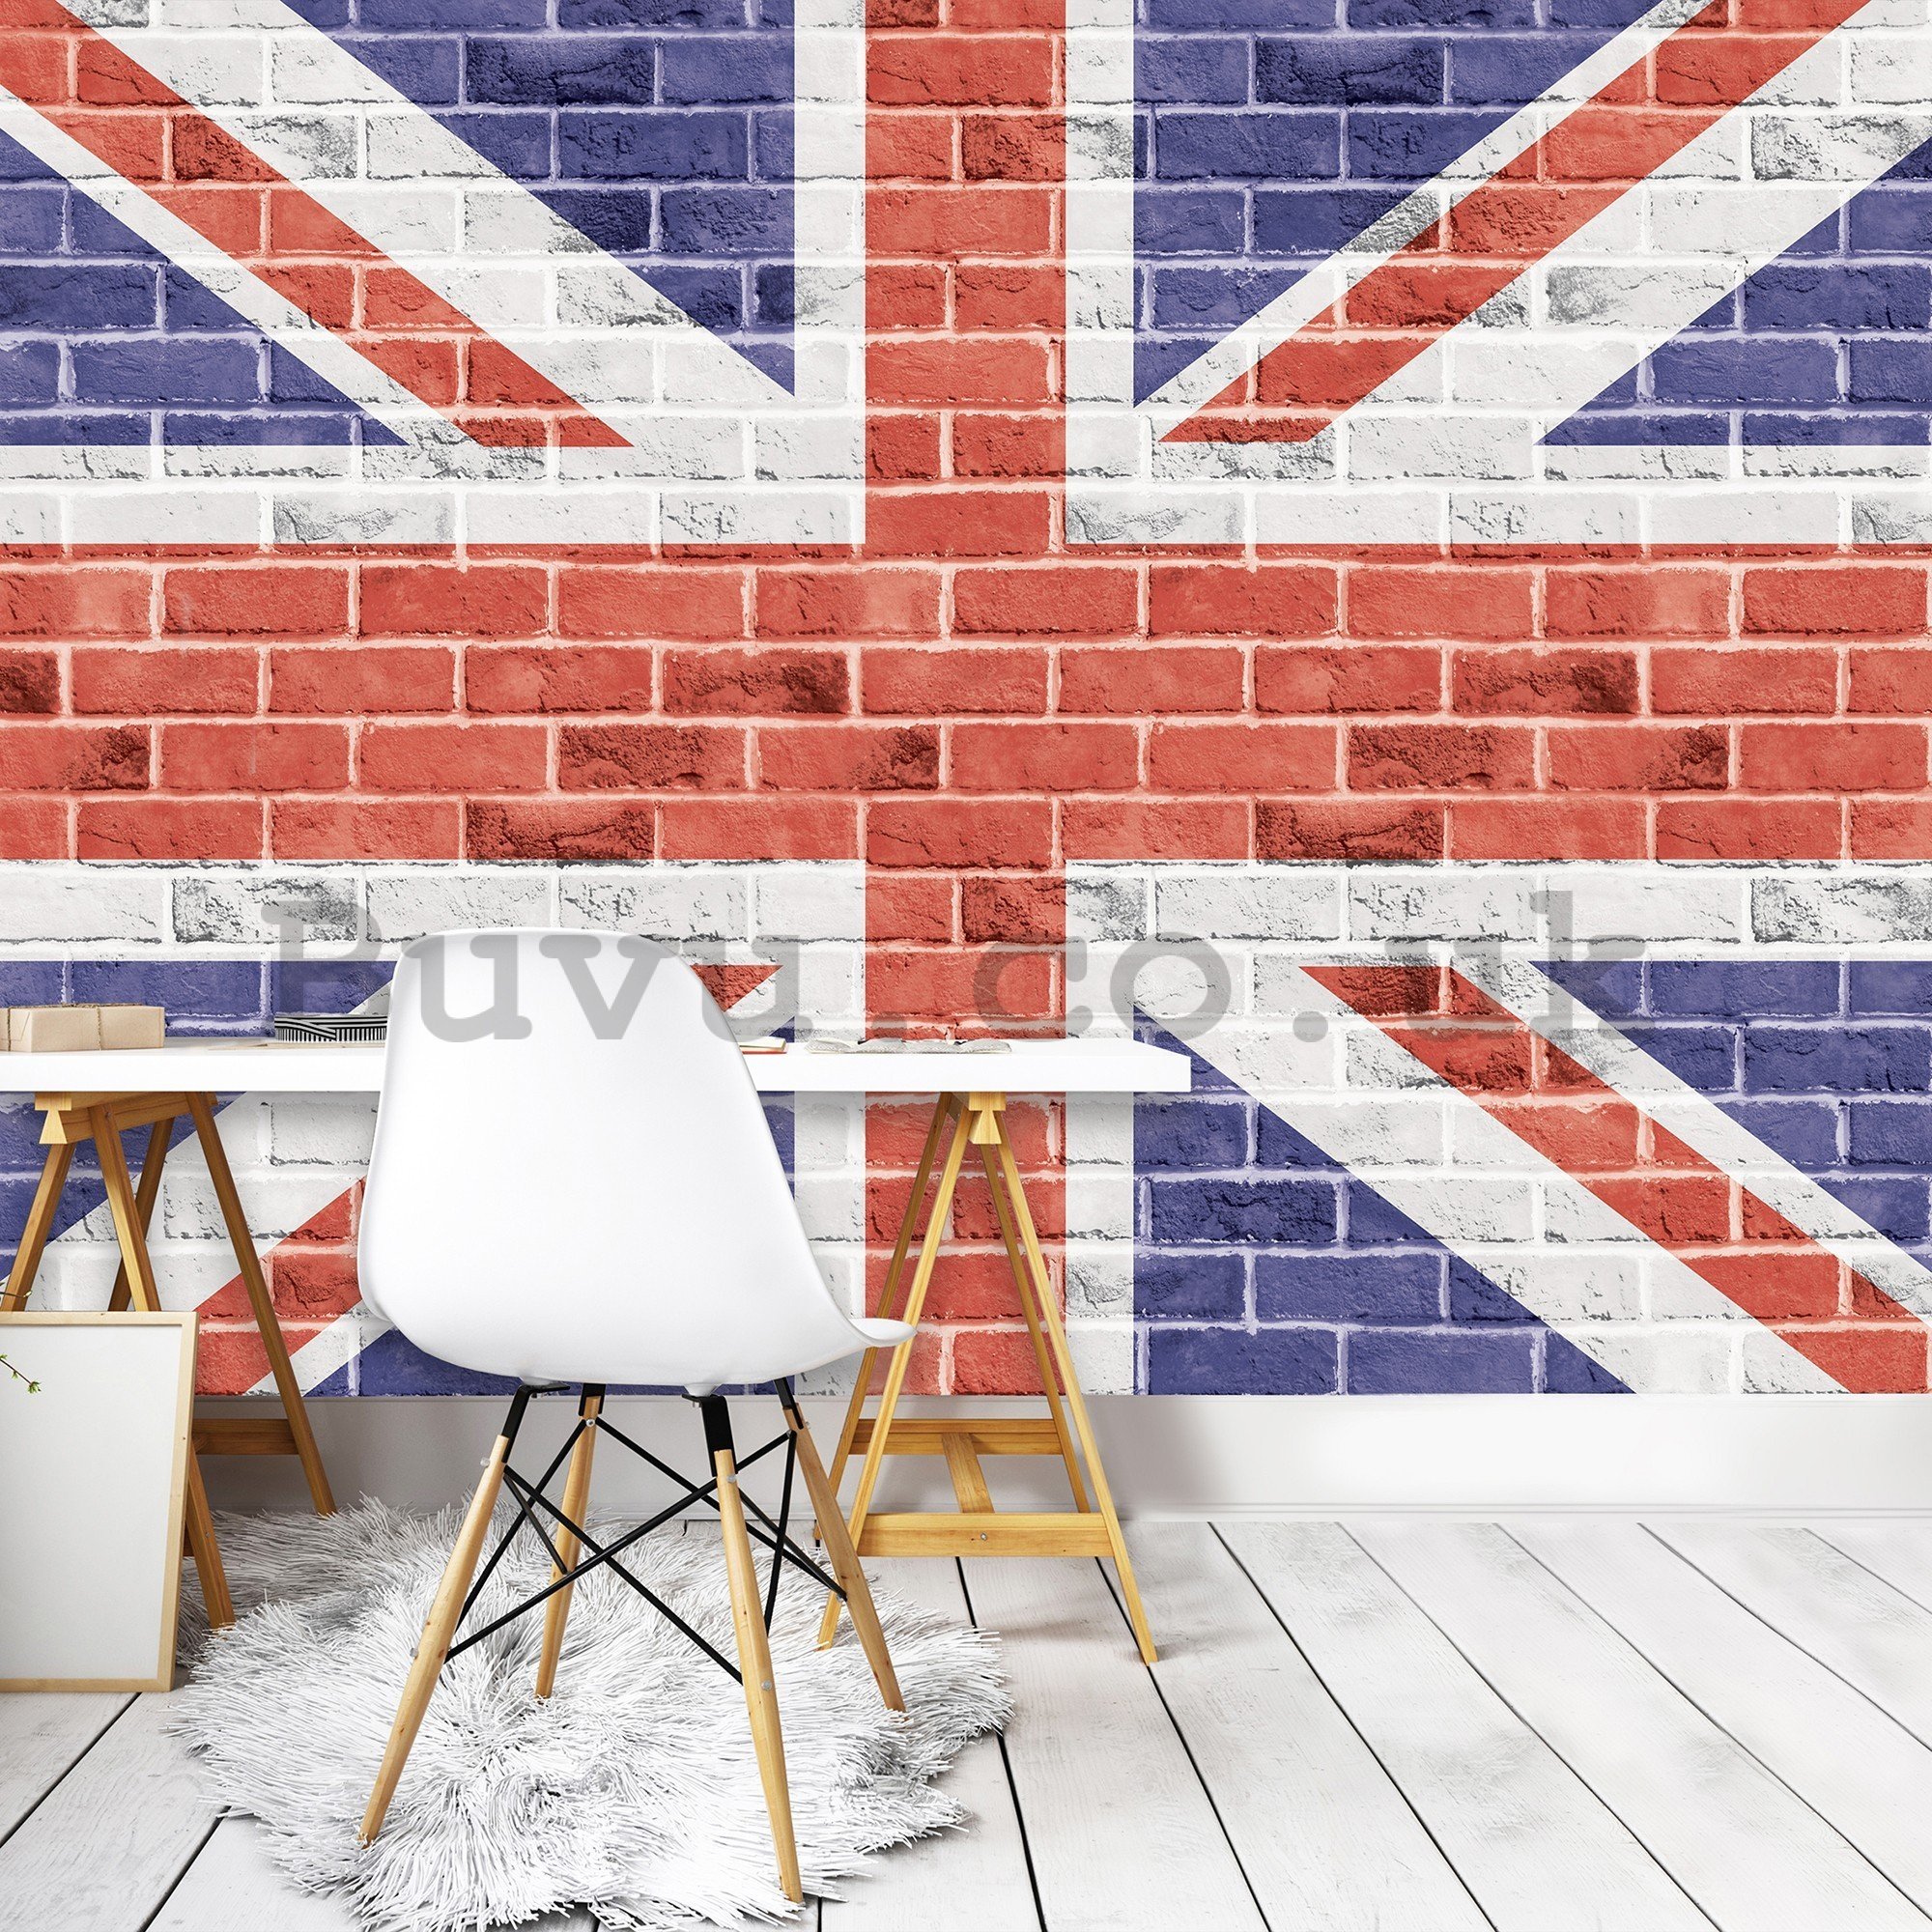 Wall mural vlies: Flag of the Great Britain (Union Jack) - 416x254 cm